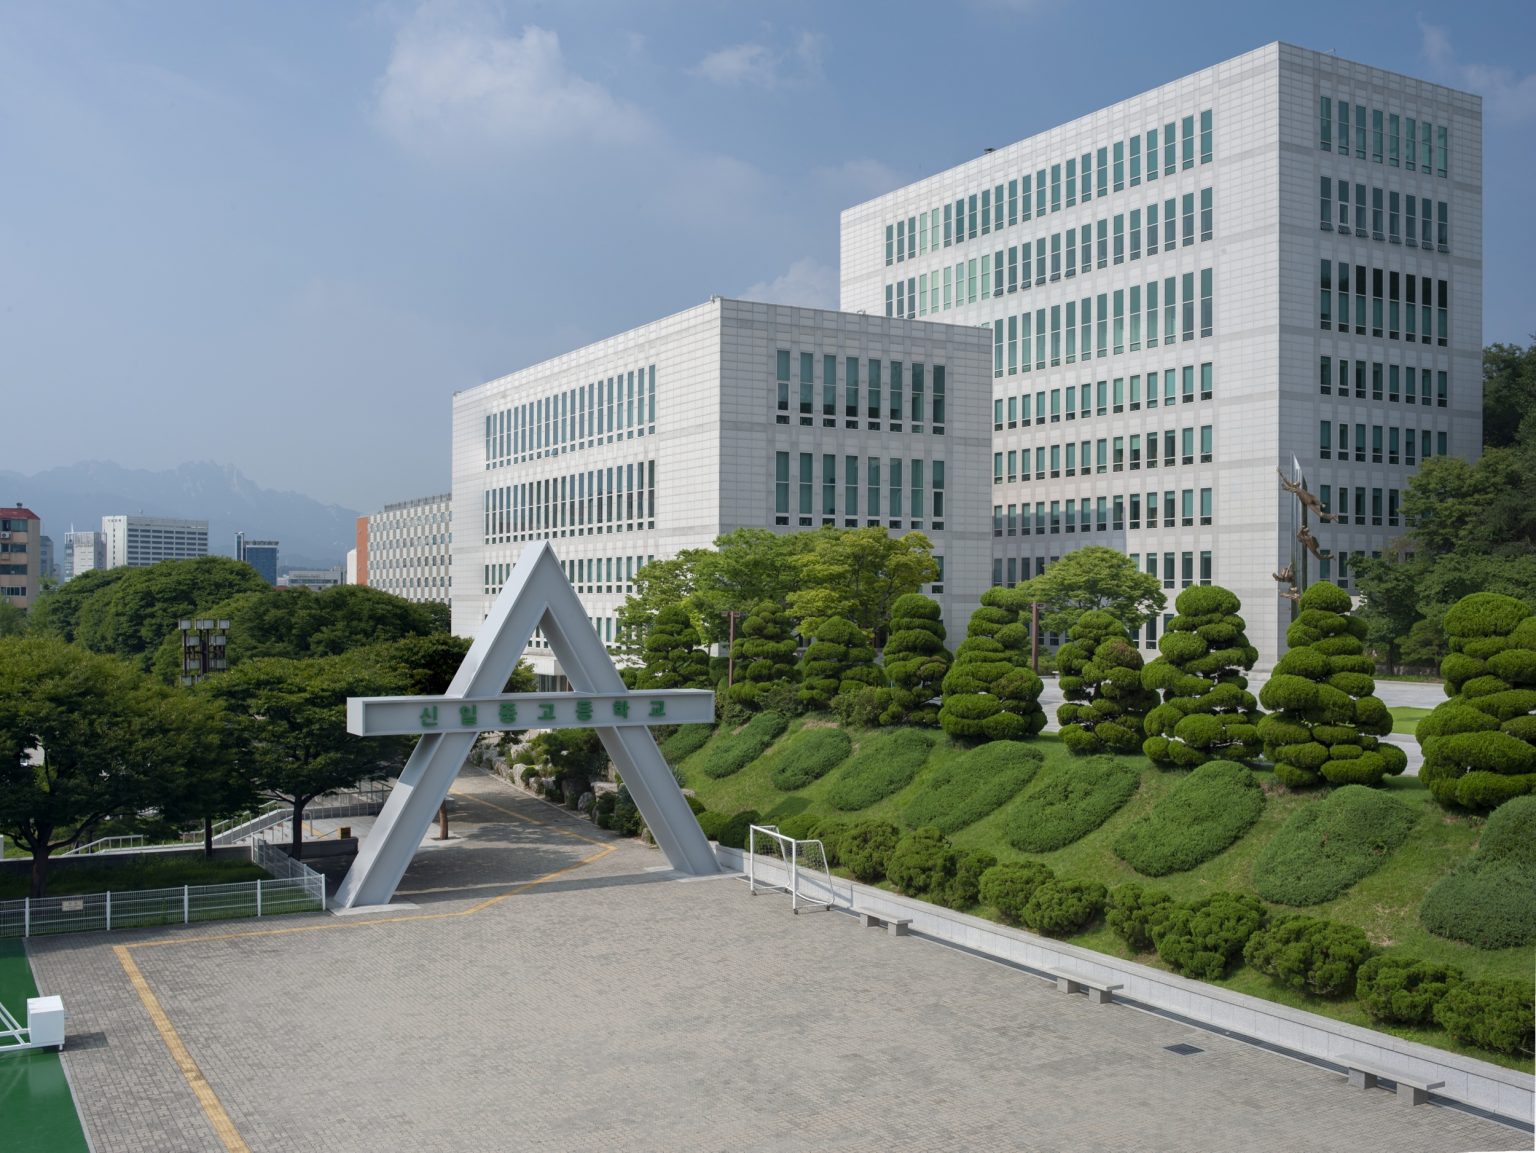 Seoul, Republic of Ko?rea, July 2015 - A view of the? entrance of the Seoul Cyber U?niversity (SCU). Founded in 20?00, the SCU was selected as th?e Top Cyber University by the ?Ministry of Education (MOE) in? 2007 and in 2013 received lev?el A (the highest) replacement? from a MOE's competency evalu?ation of the Cyber Universitie?s of South Korea.